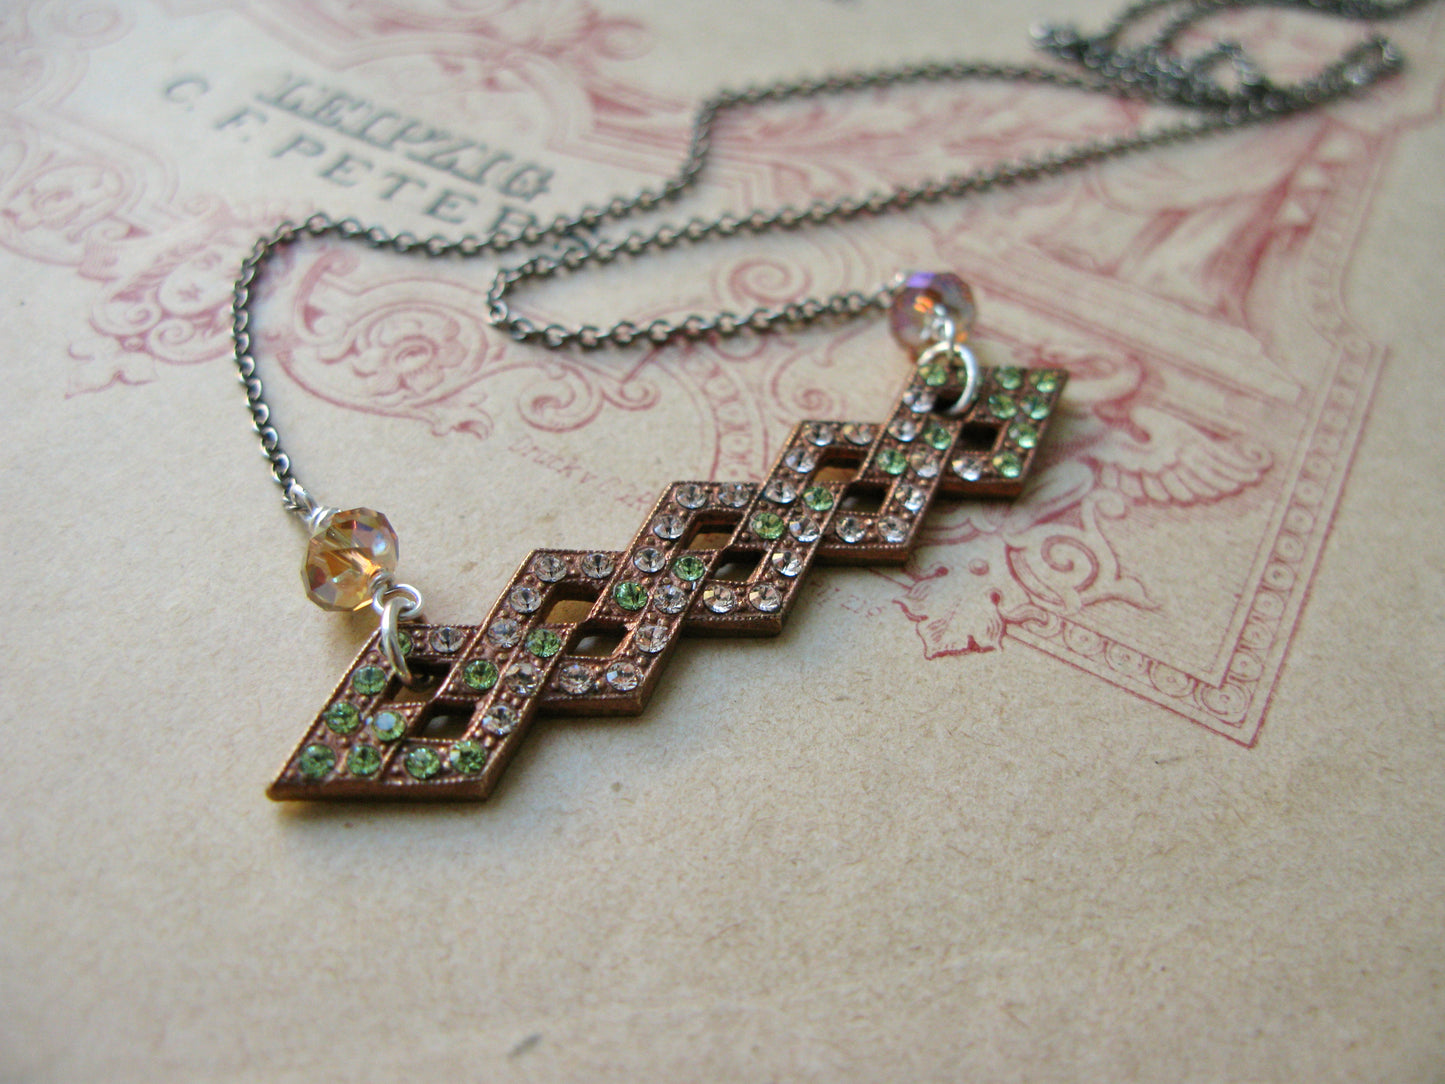 Way To Go pendant necklace in peridot+silk